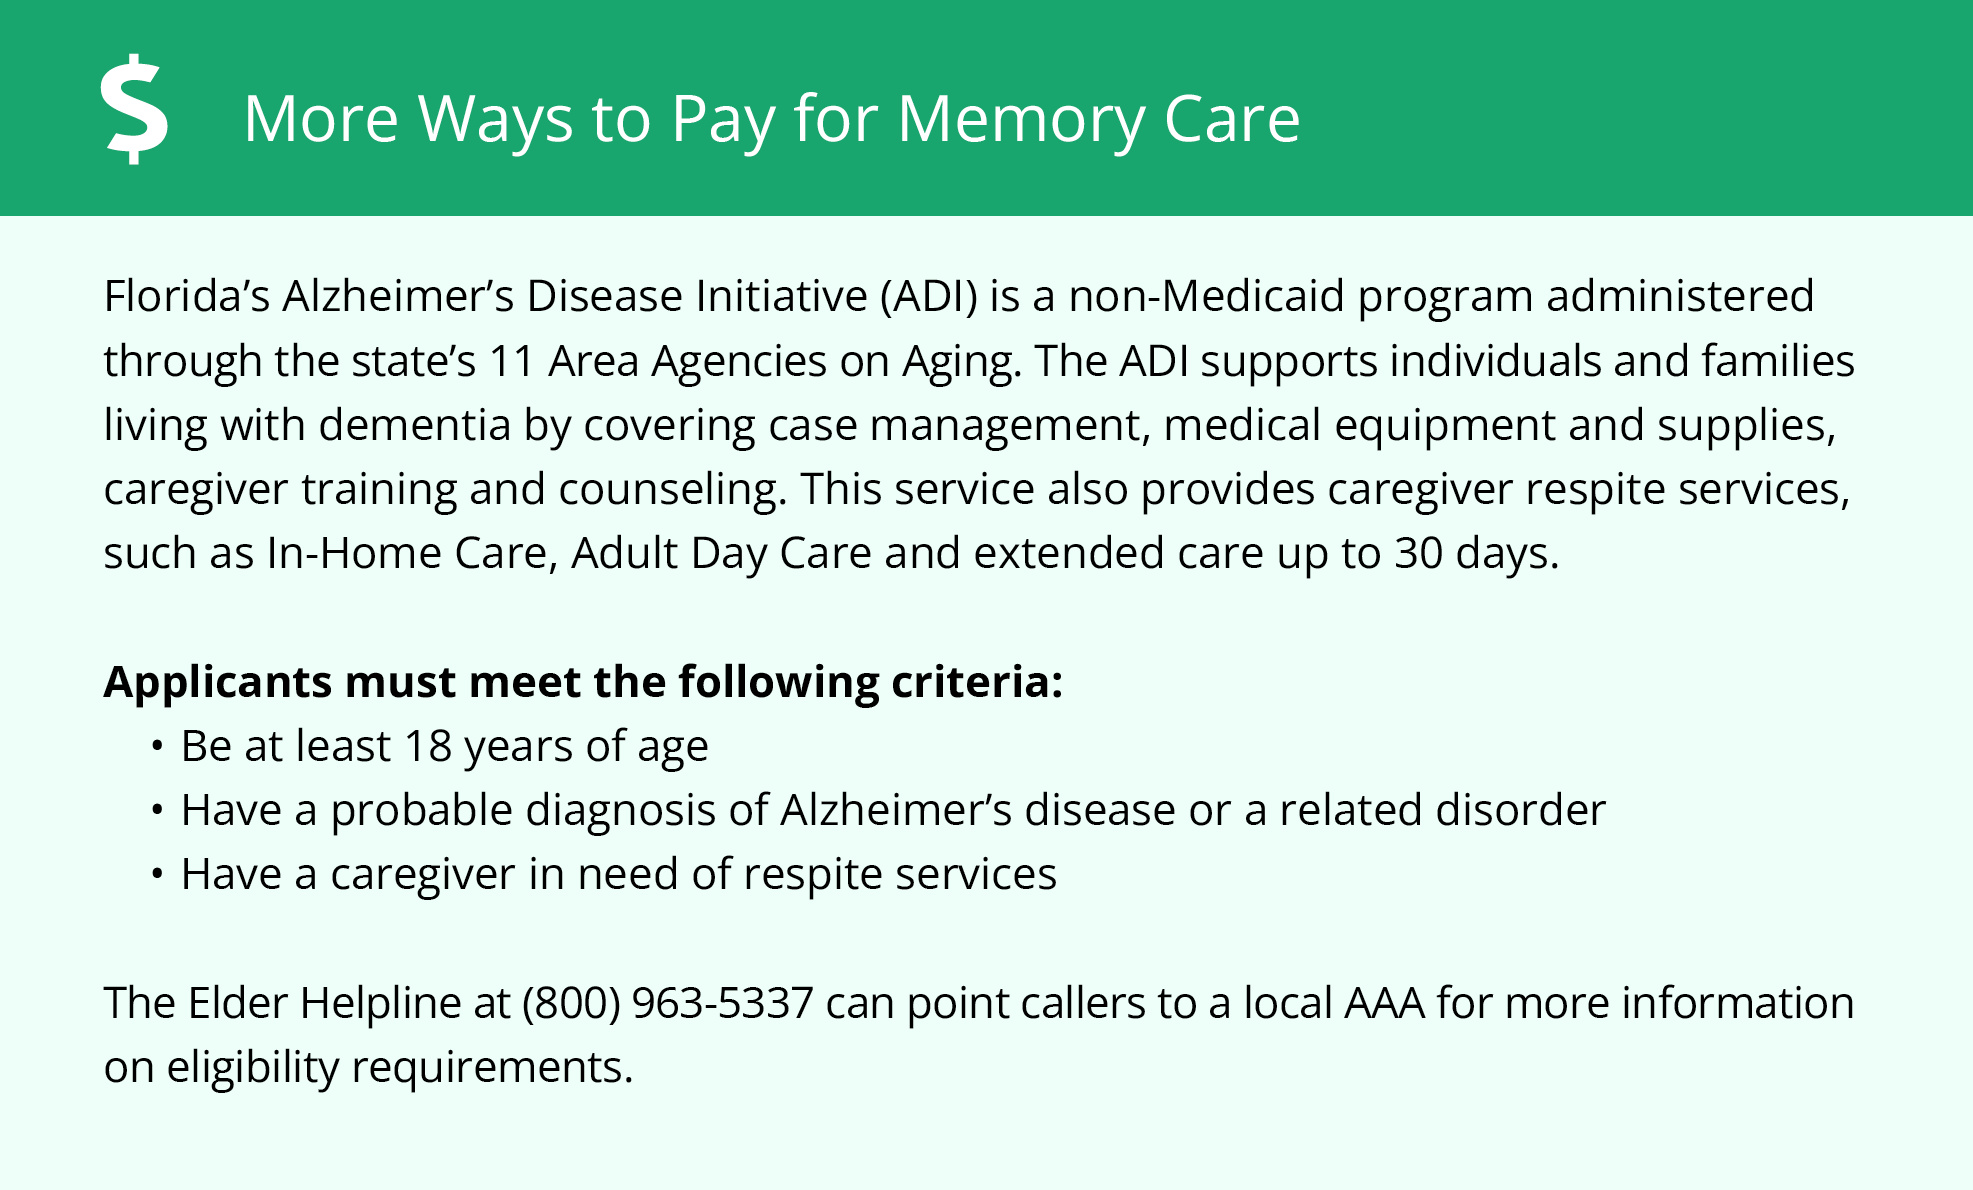 More Ways to Pay for Memory Care - Florida